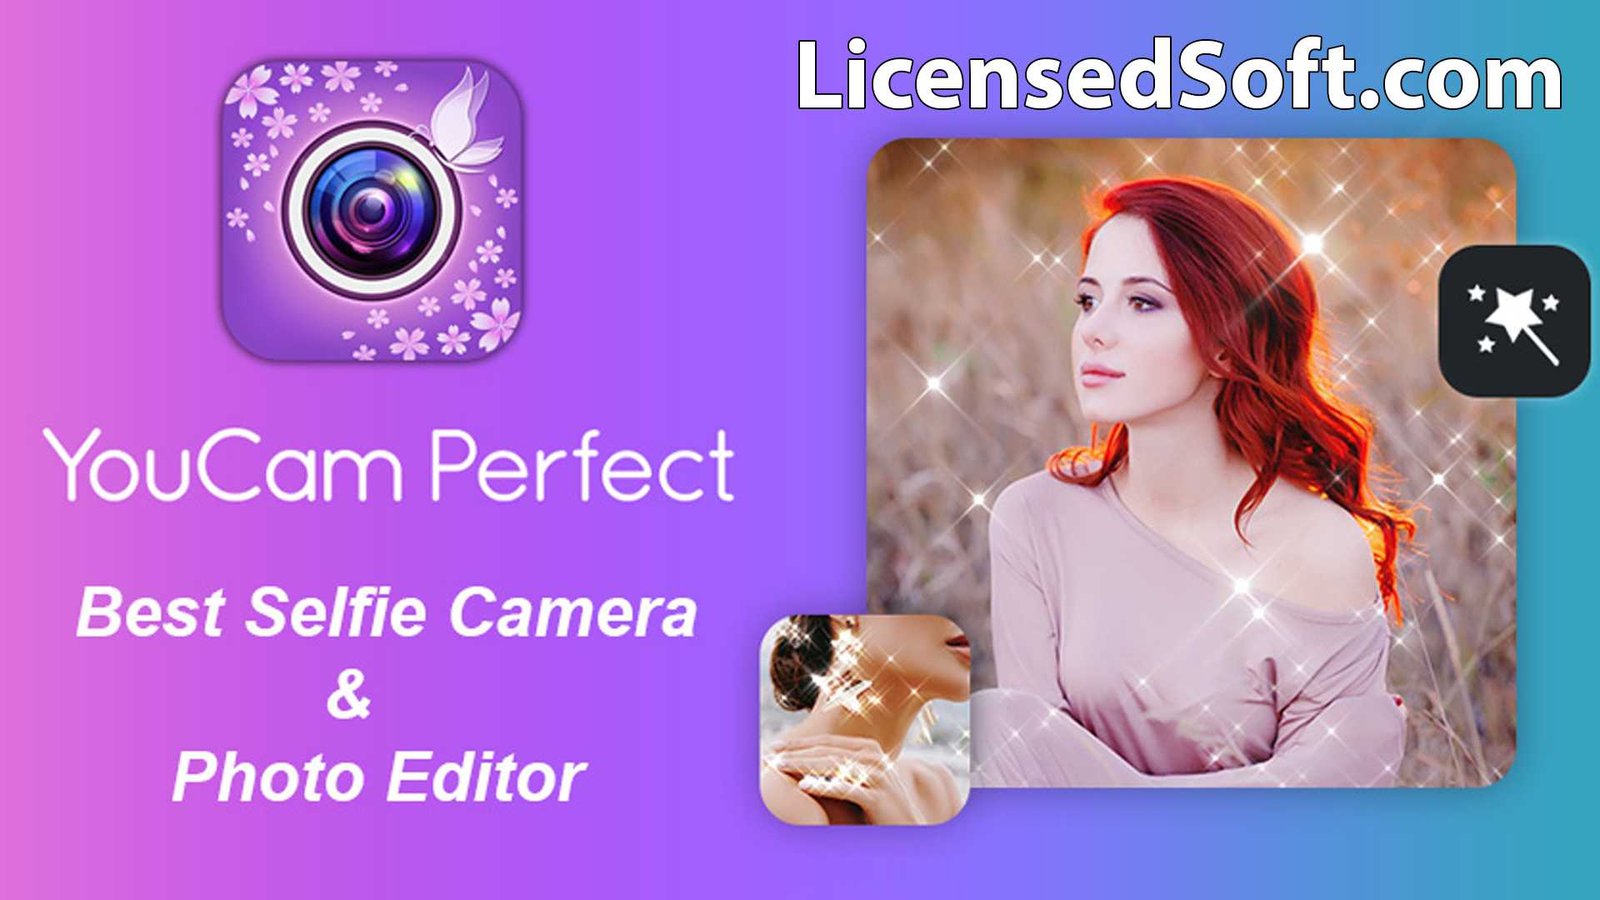 YouCam Perfect - Photo Editor v5.82.1 Cover Image By LicensedSoft